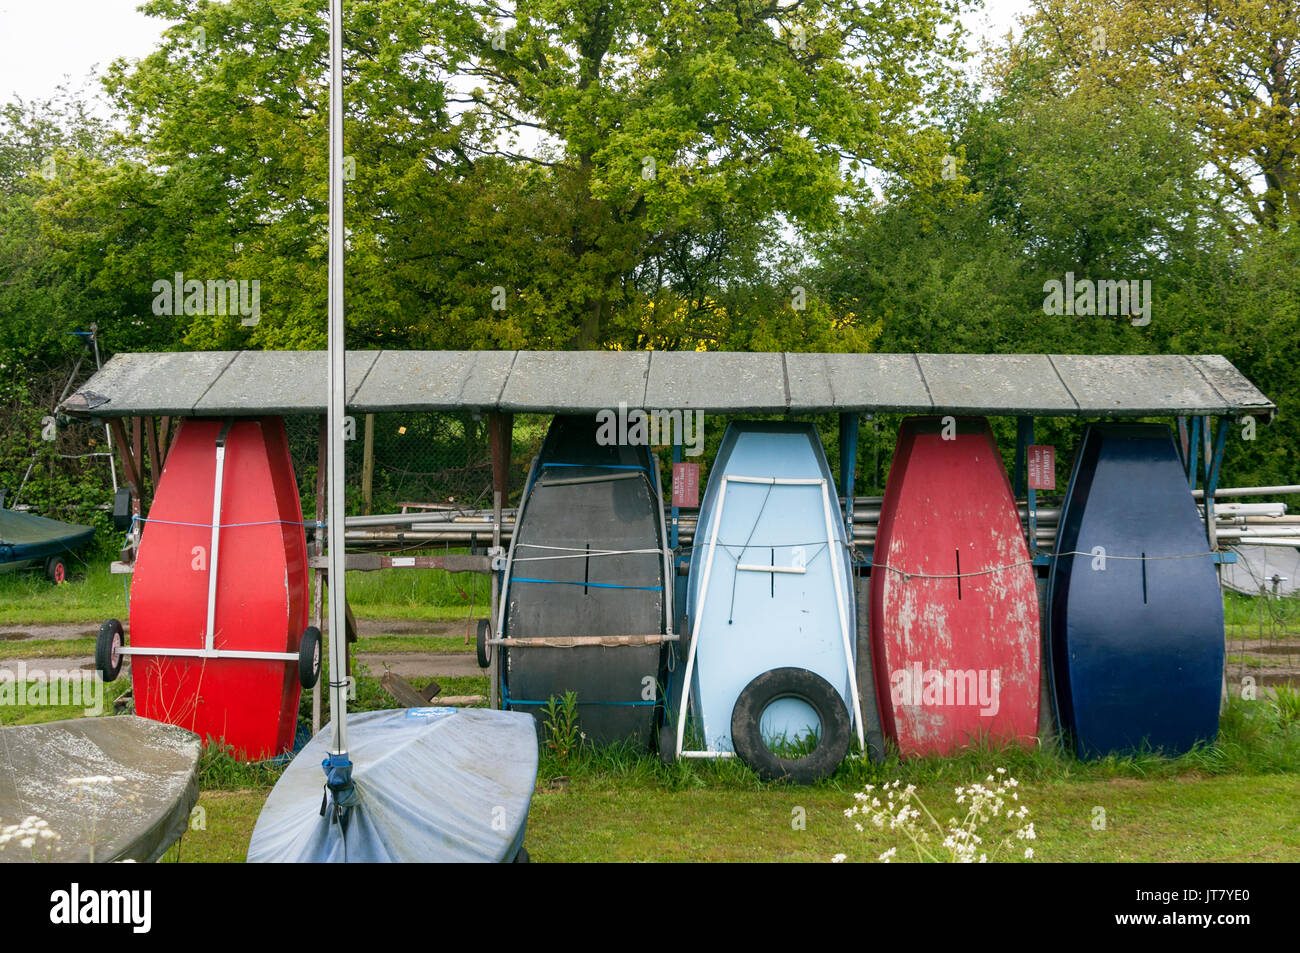 Water Sports, Small Boats, Sailing Boats, Sails Down, Boats Covered, Boats Stored on Land, Masts Down, Greenery Background, Boatyard, Docked Stock Photo